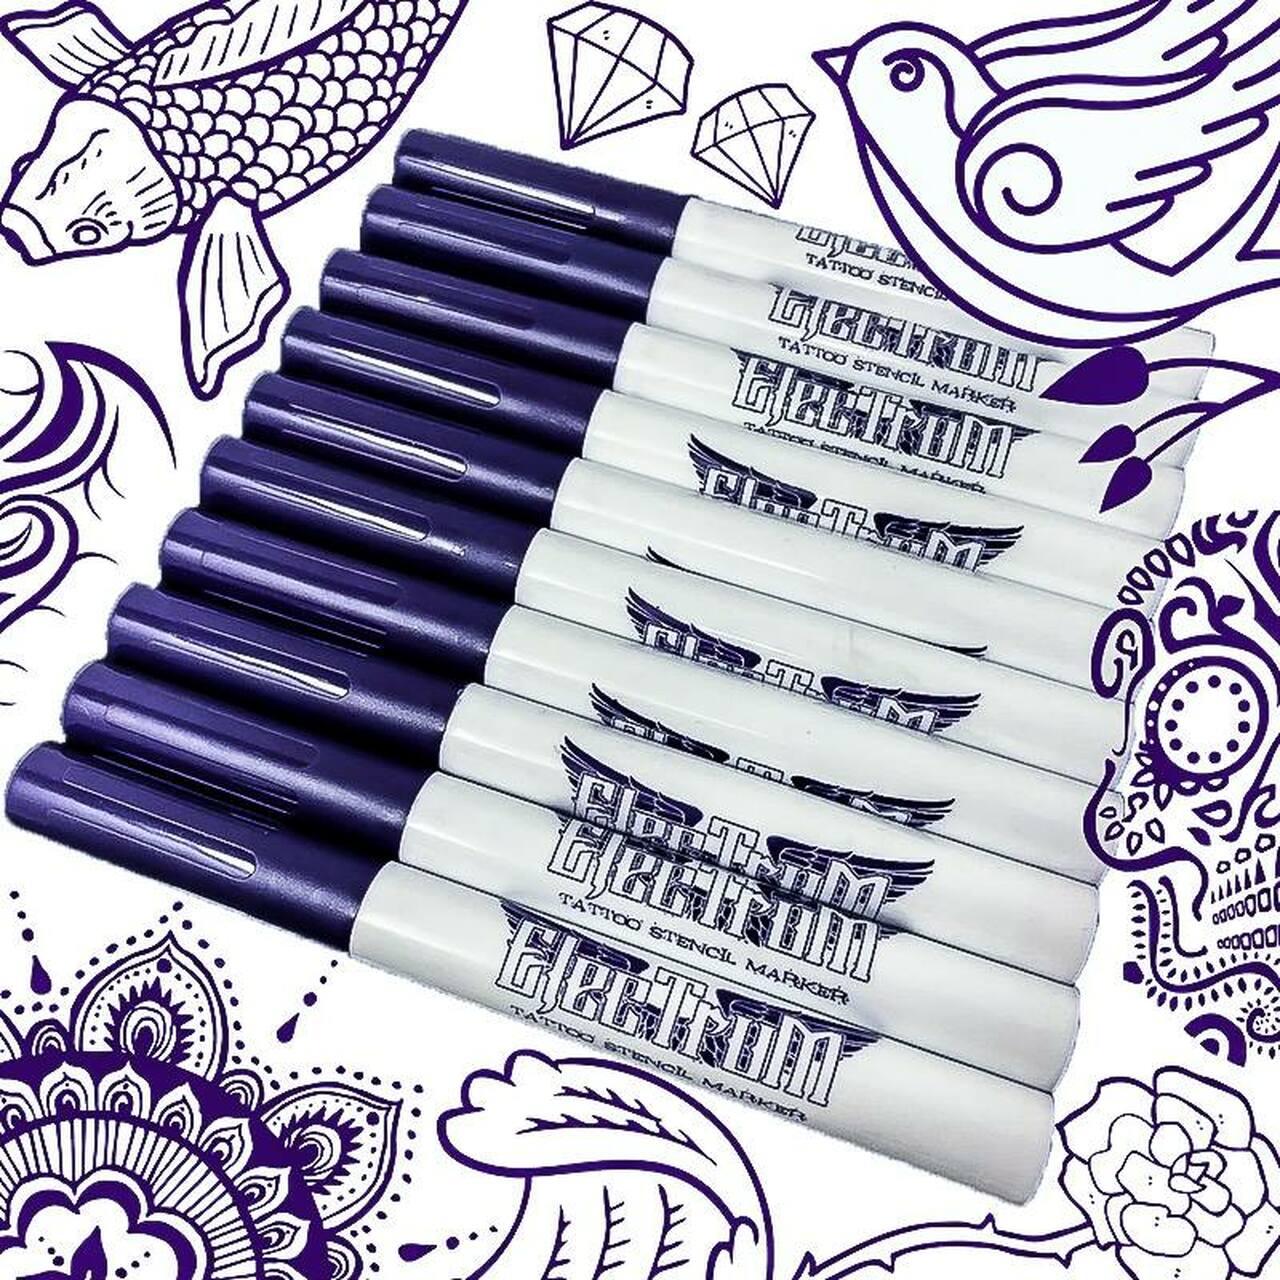 Electrum Disposable Skin Markers - Violet (alcohol resistant) - Tattoo Everything Supplies